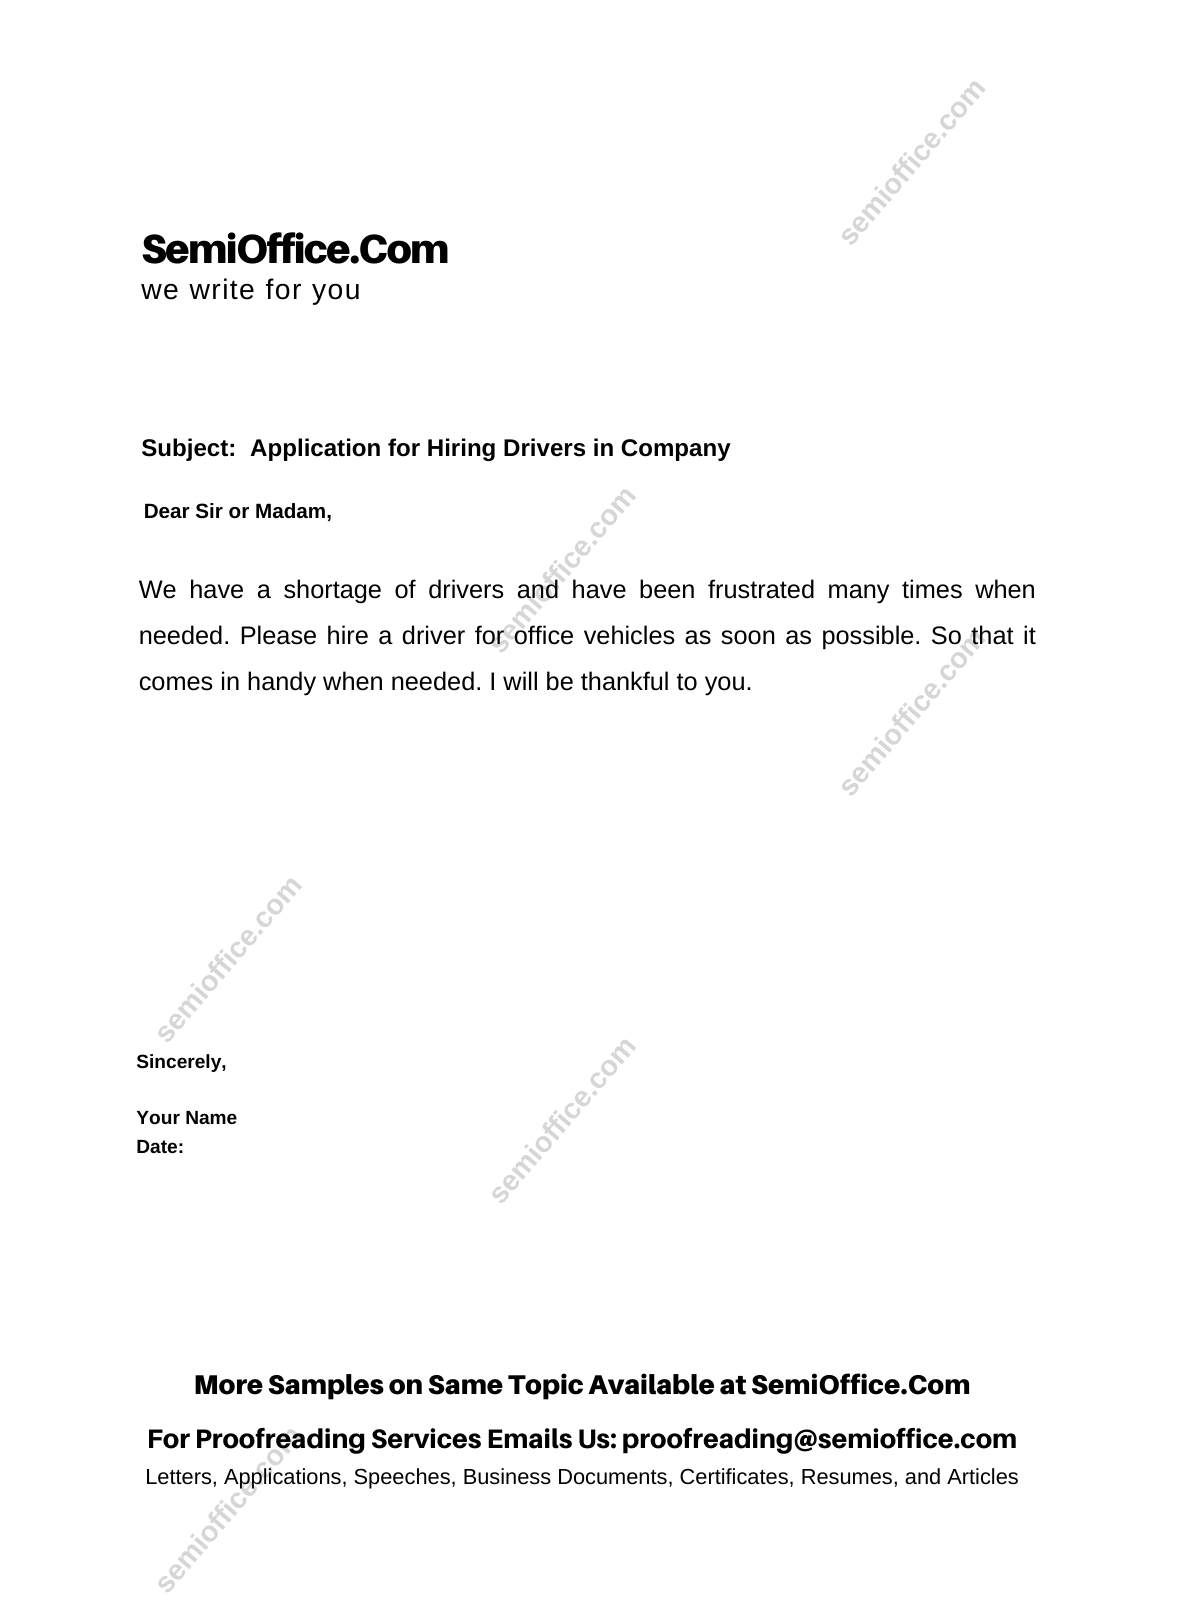 application letter for driver vacancy